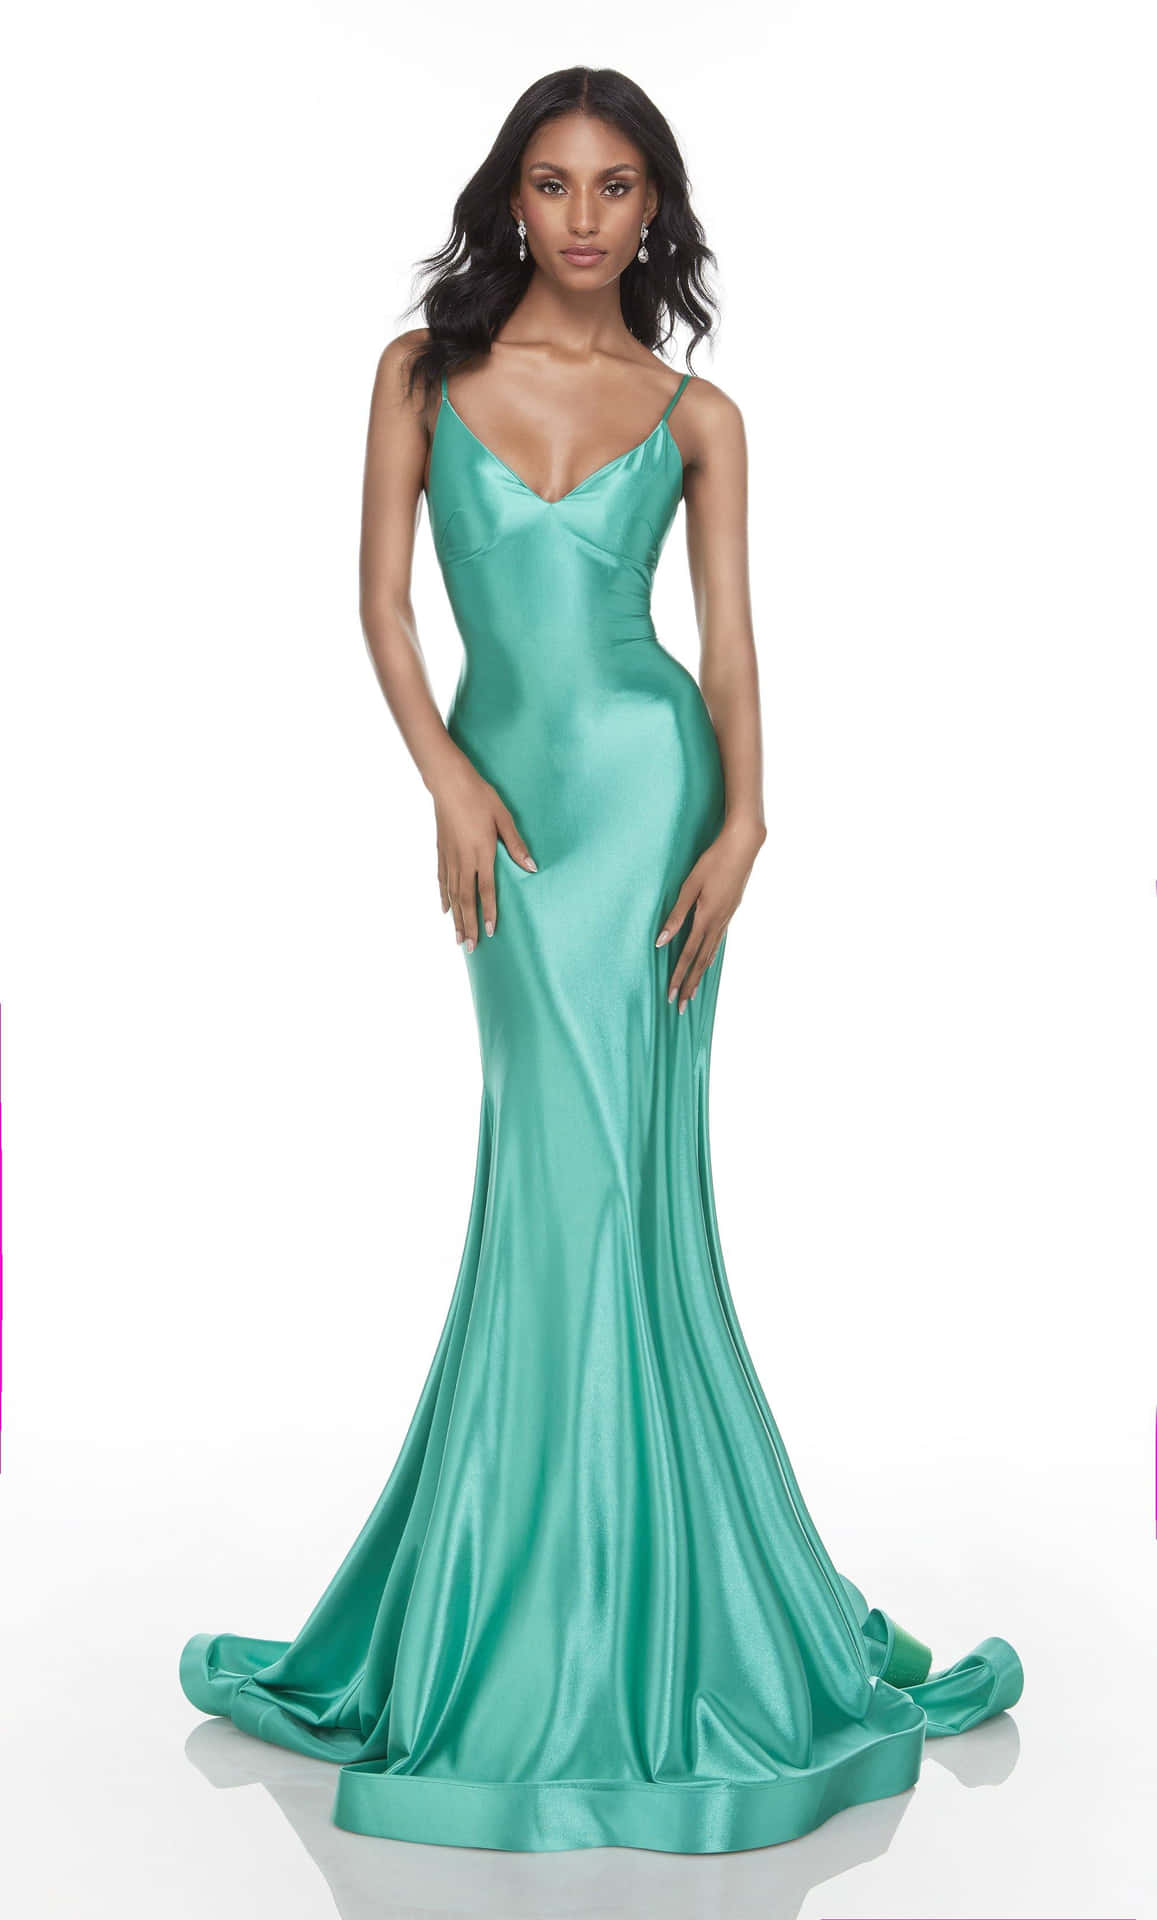 Model In Teal Long Dress Picture